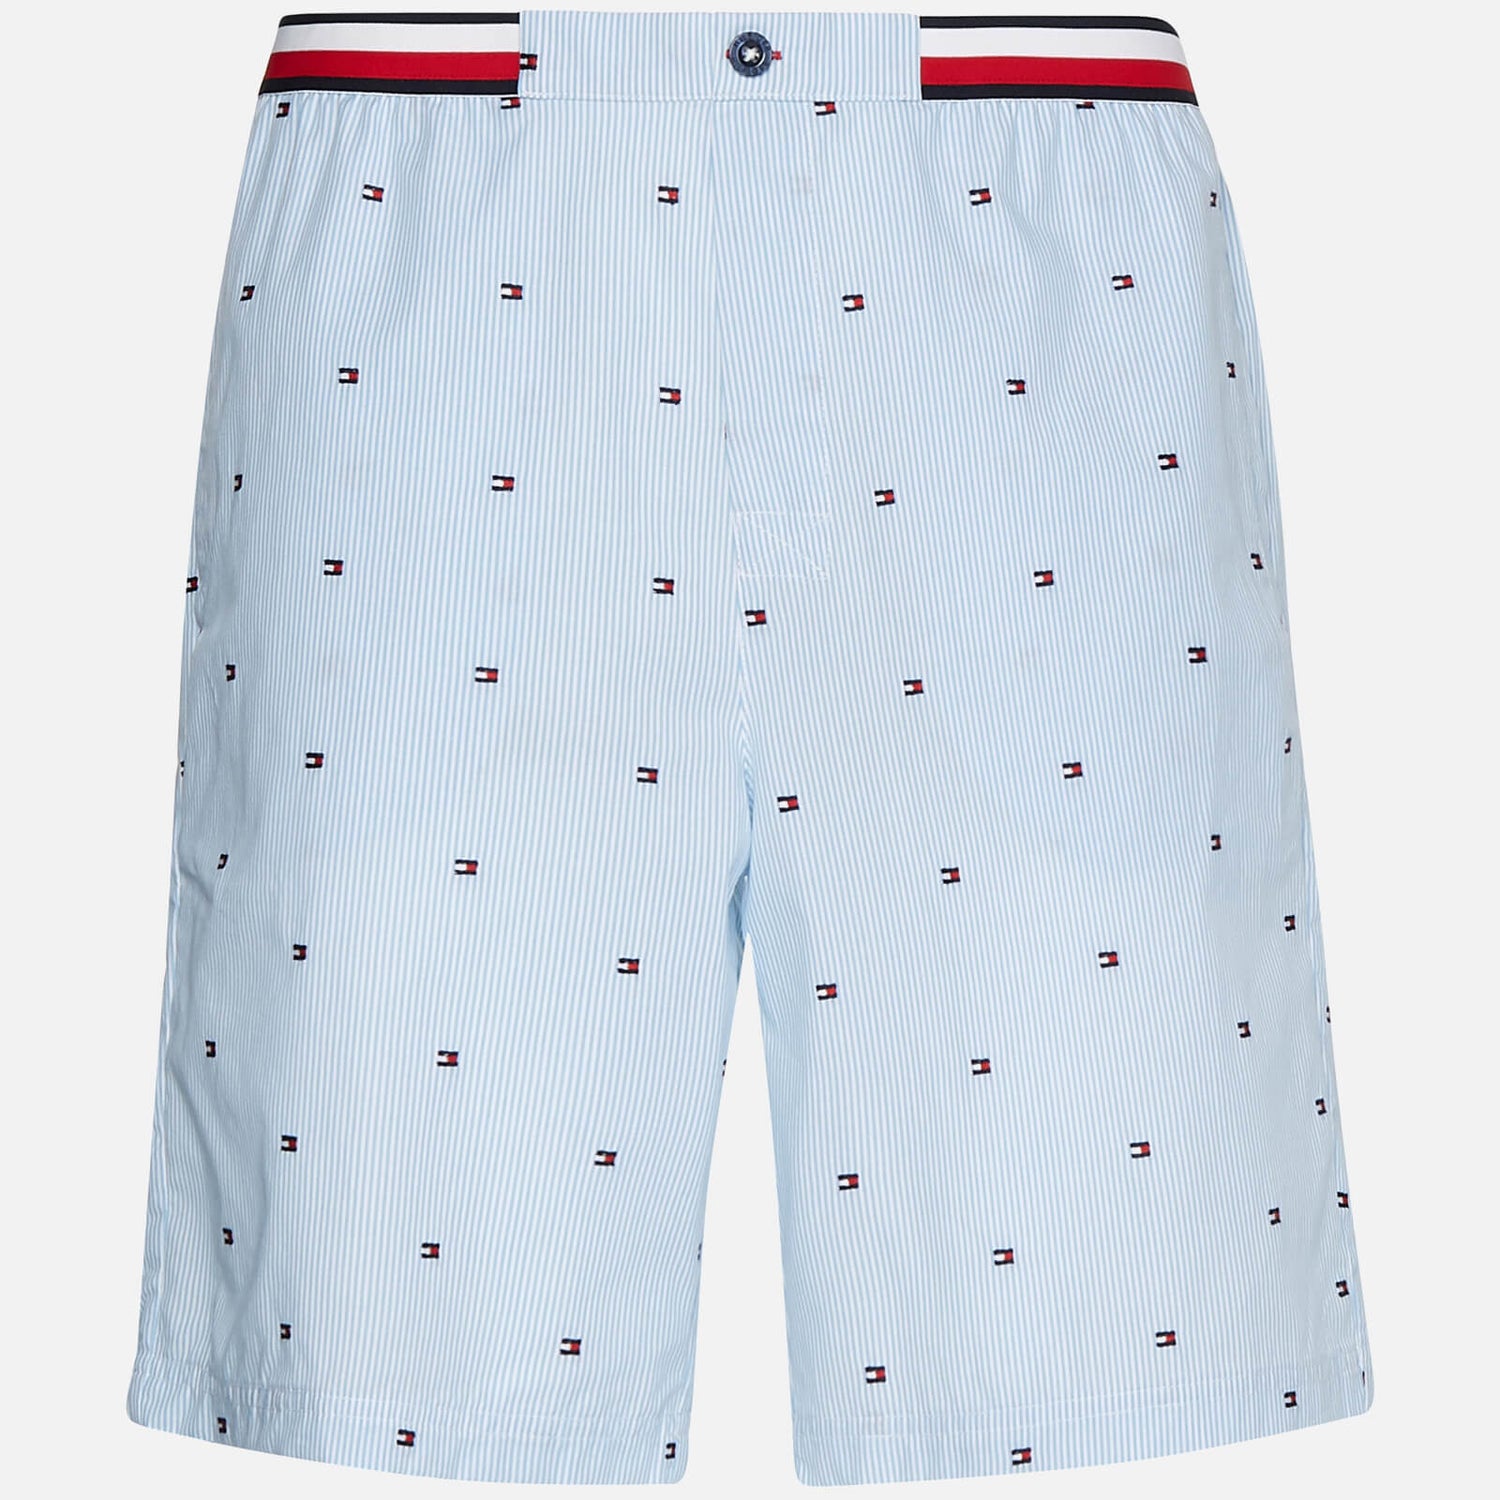 Tommy Hilfiger Men's Woven Shorts - Ithica Stripes